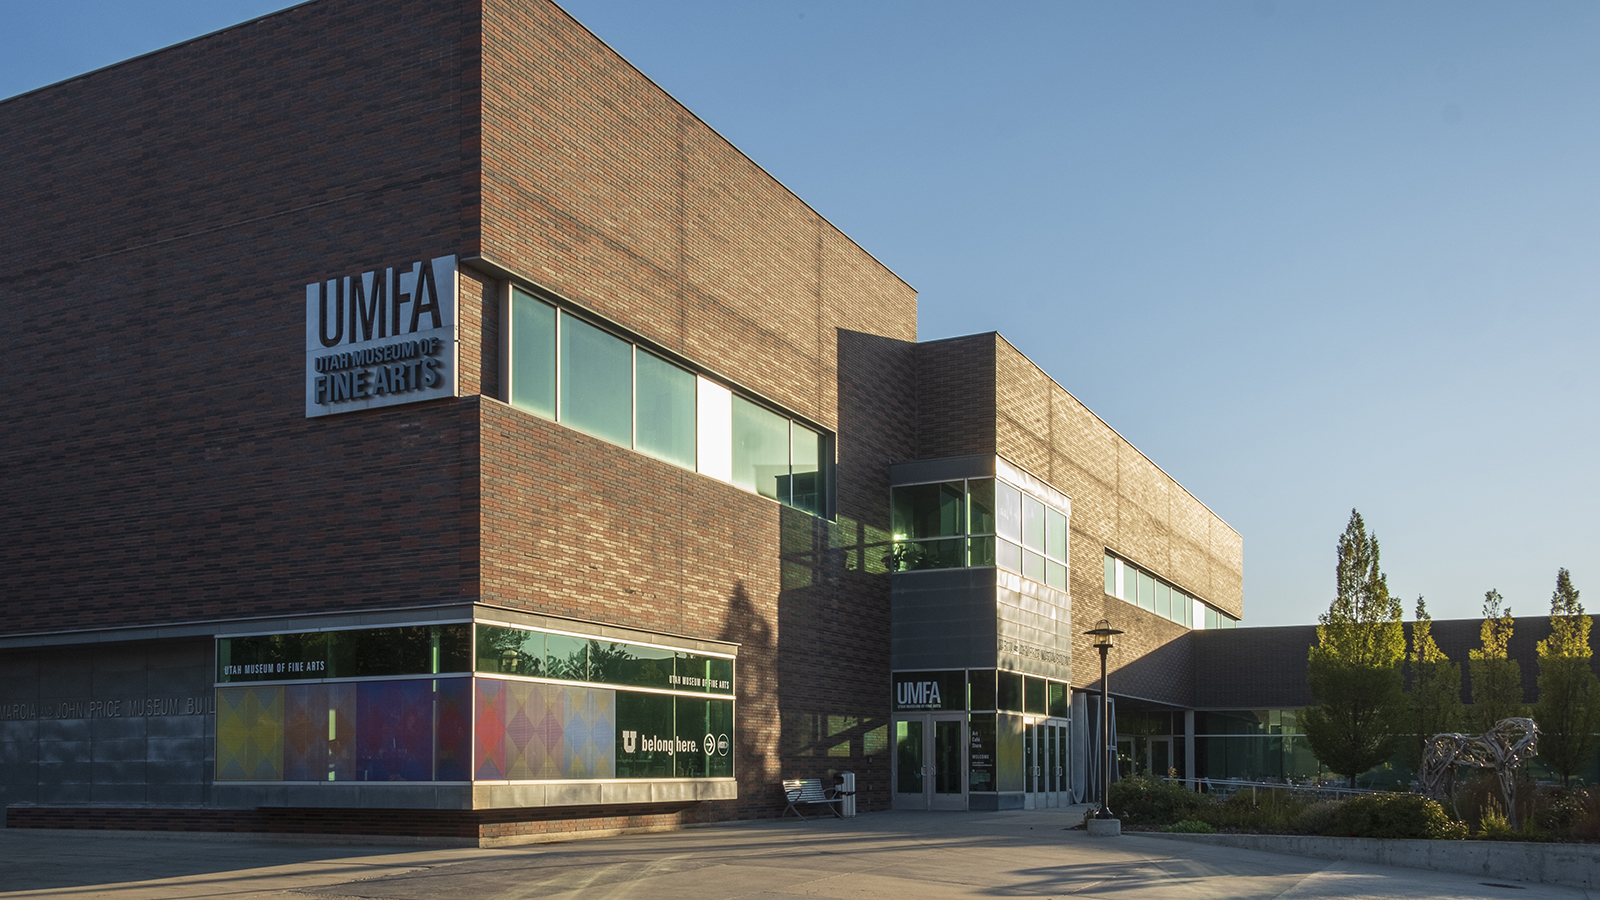 the UMFA museum building exterior at sunset, a two story, modern building with long horizontal windows